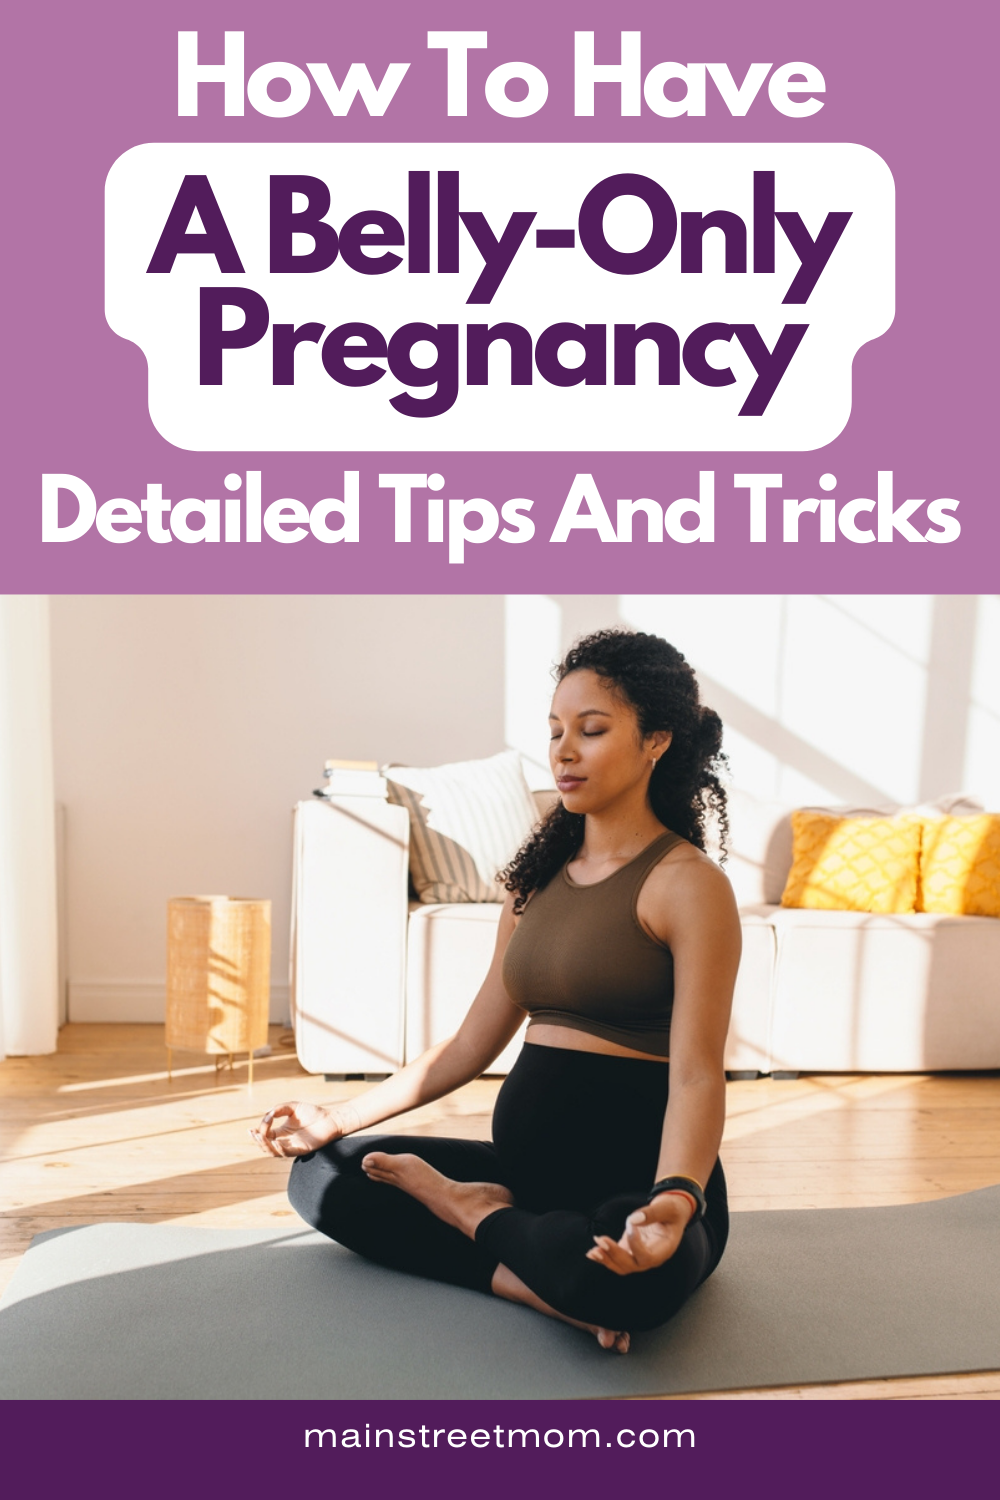 How To Have A Belly-Only Pregnancy: Detailed Tips And Tricks